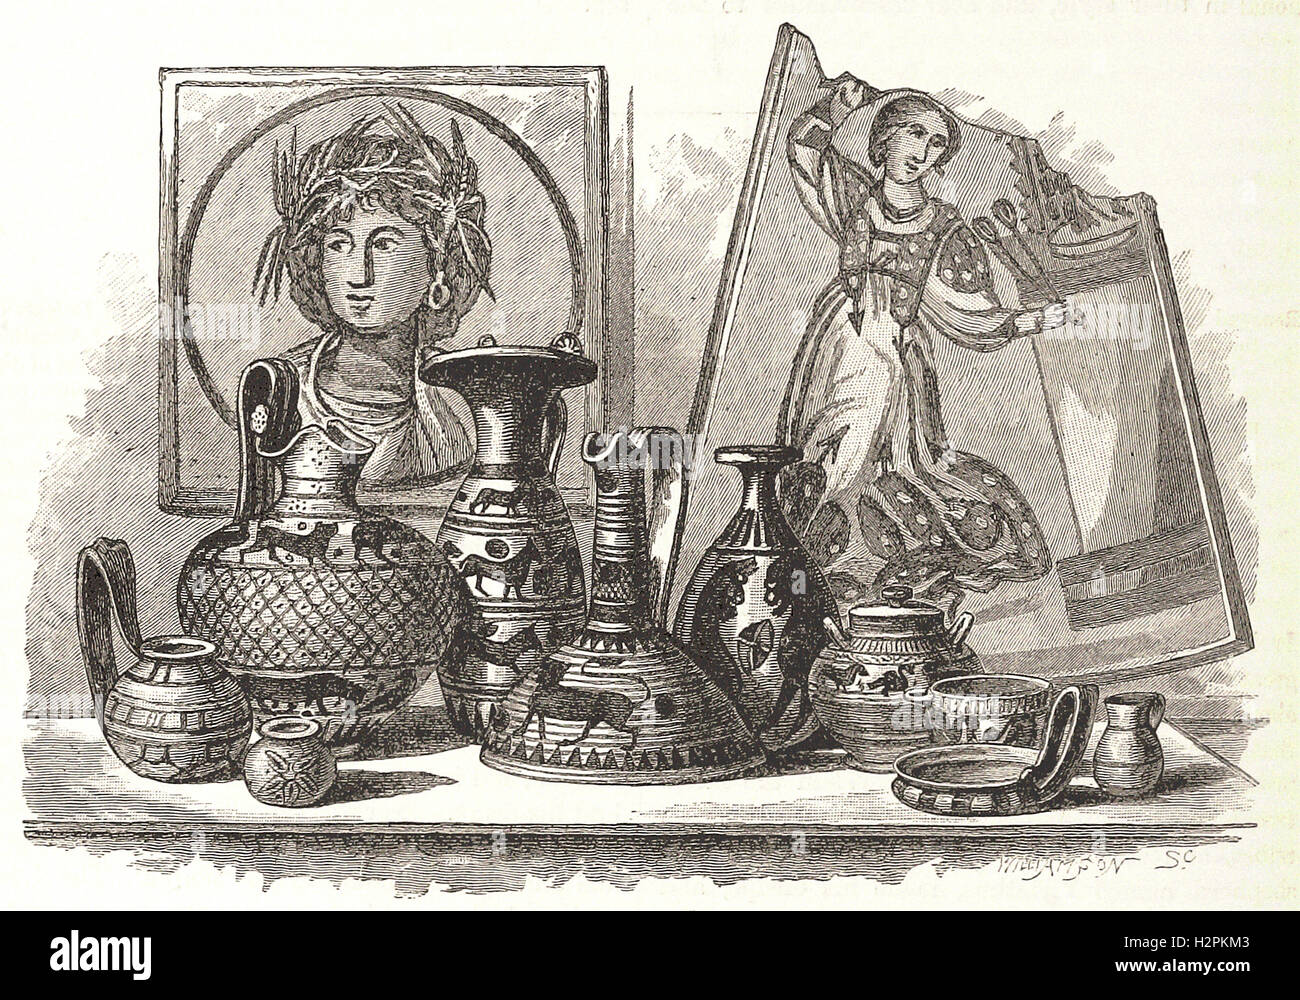 SPECIMENS OF CARTHAGINIAN ART - from 'Cassell's Illustrated Universal History' - 1882 Stock Photo